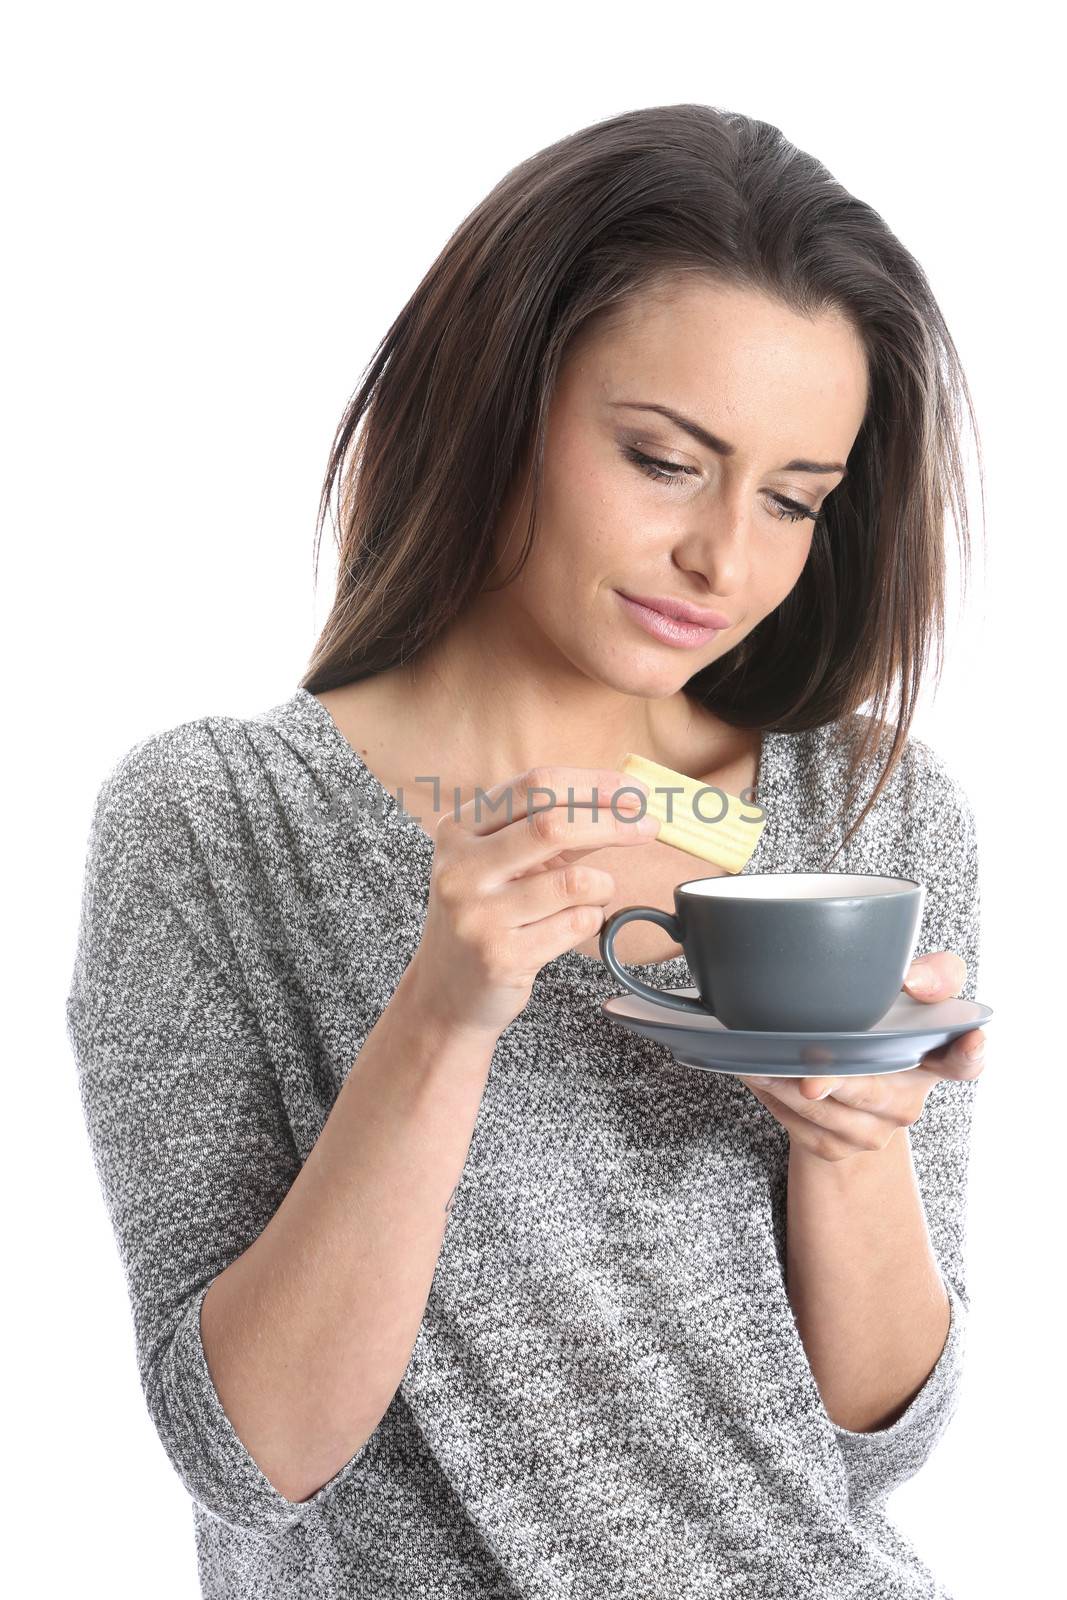 Model Released. Woman Drinking a Cup of Coffee